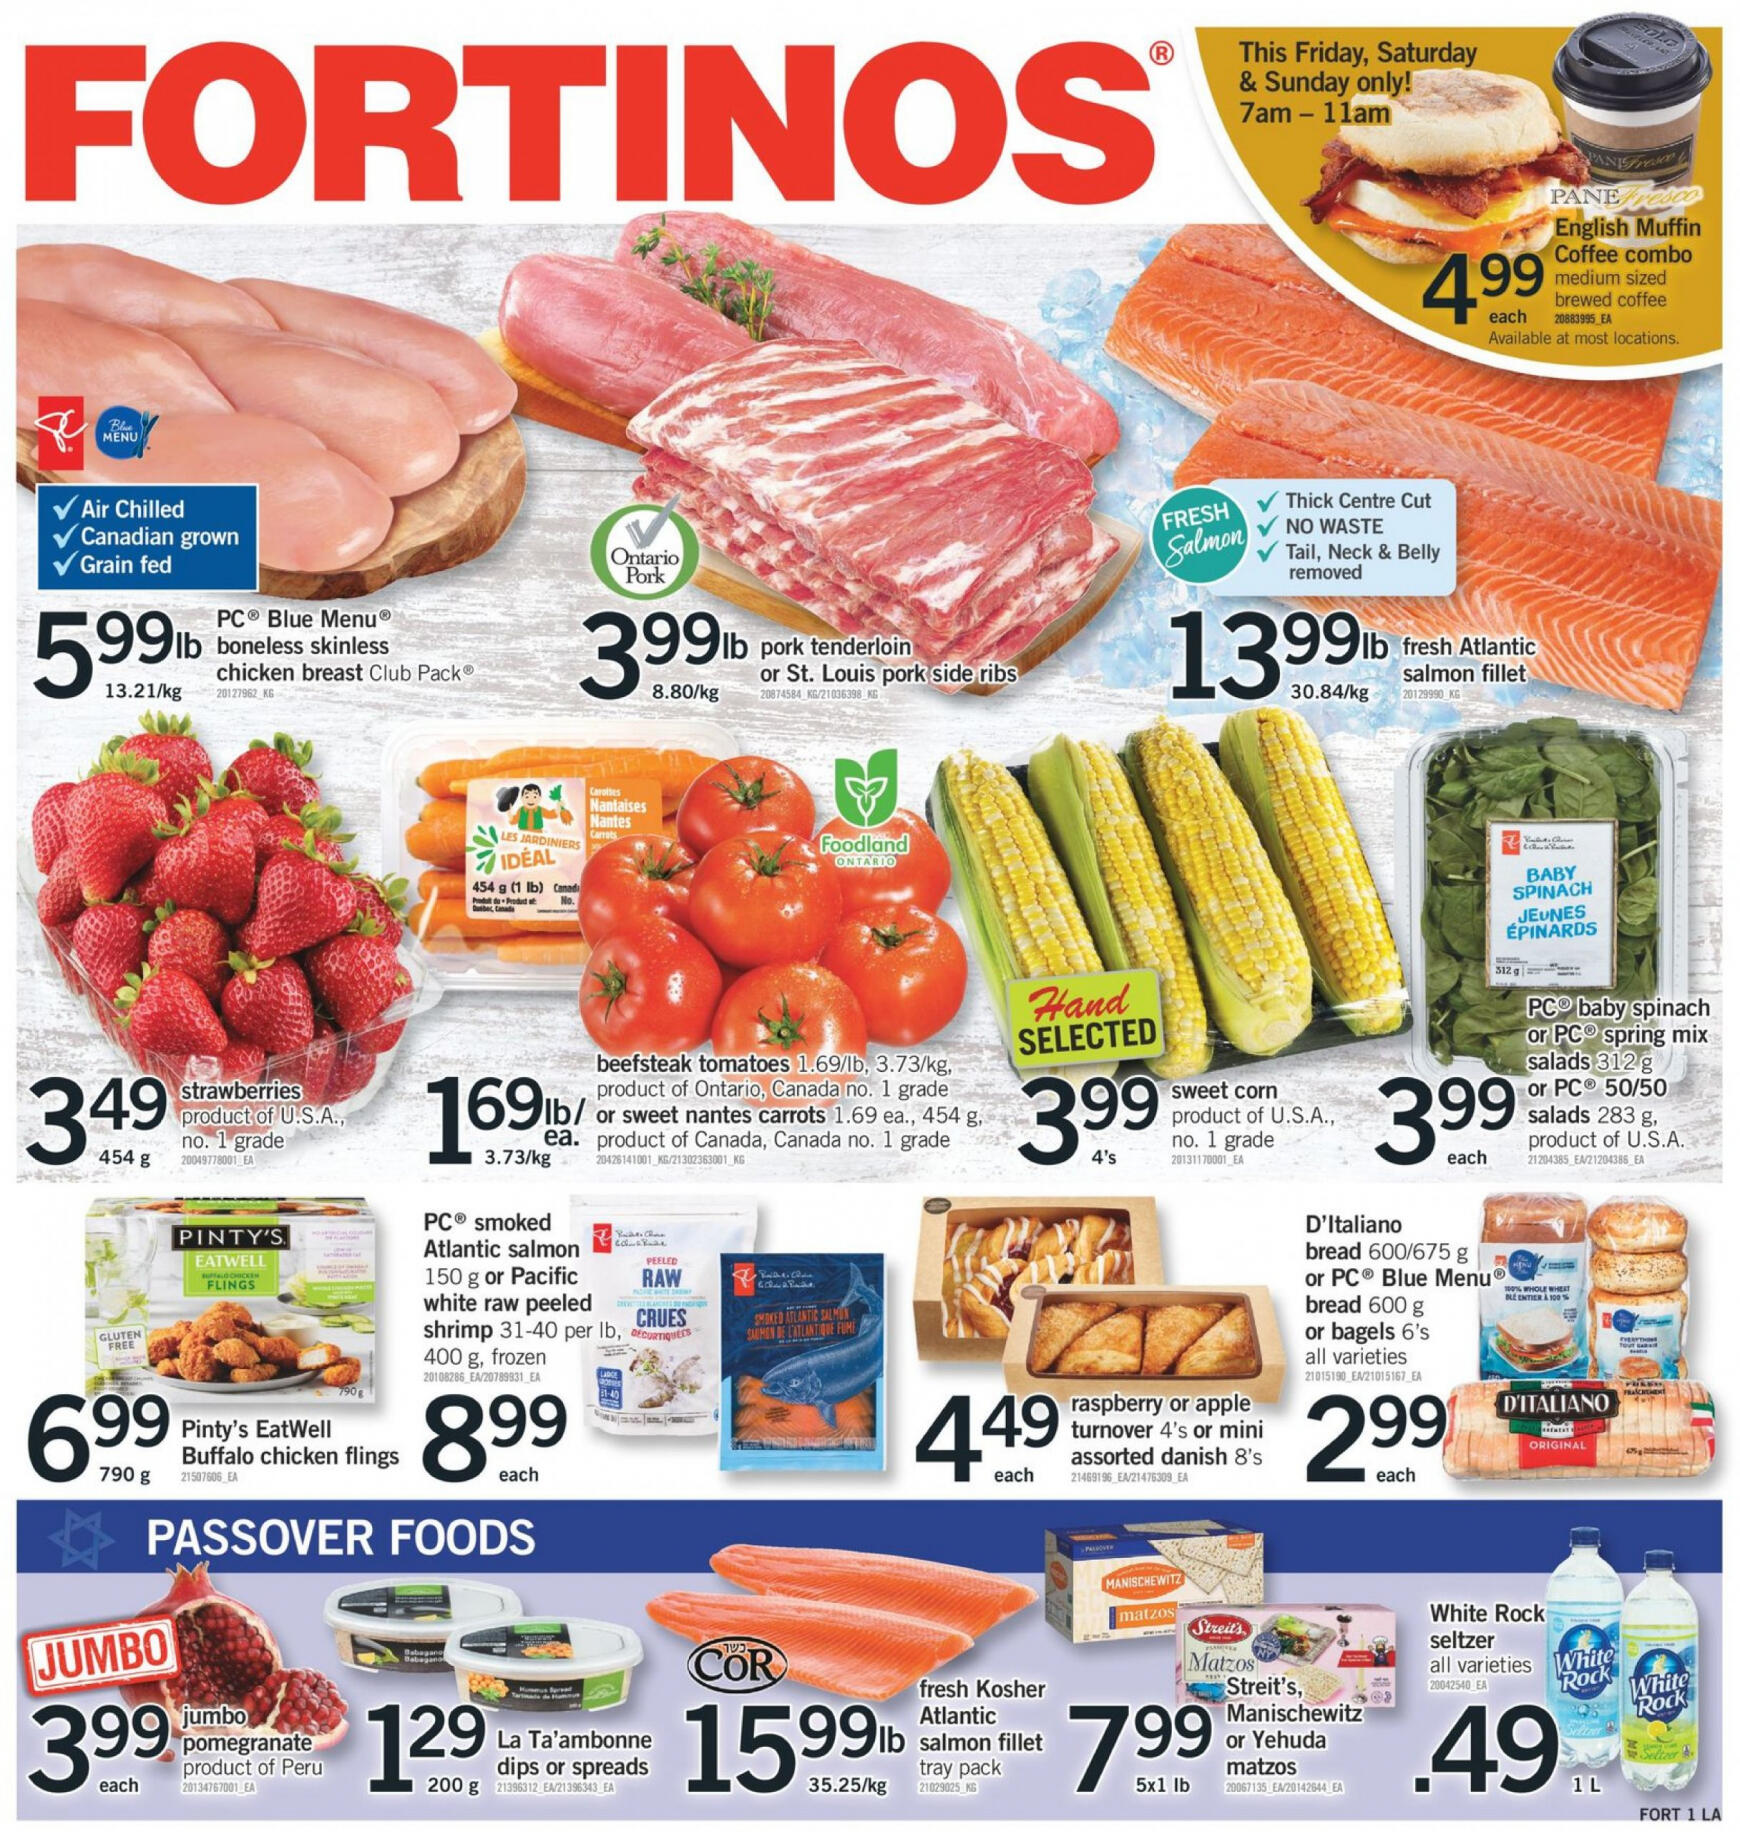 fortinos - Fortinos flyer current 11.04. - 17.04.